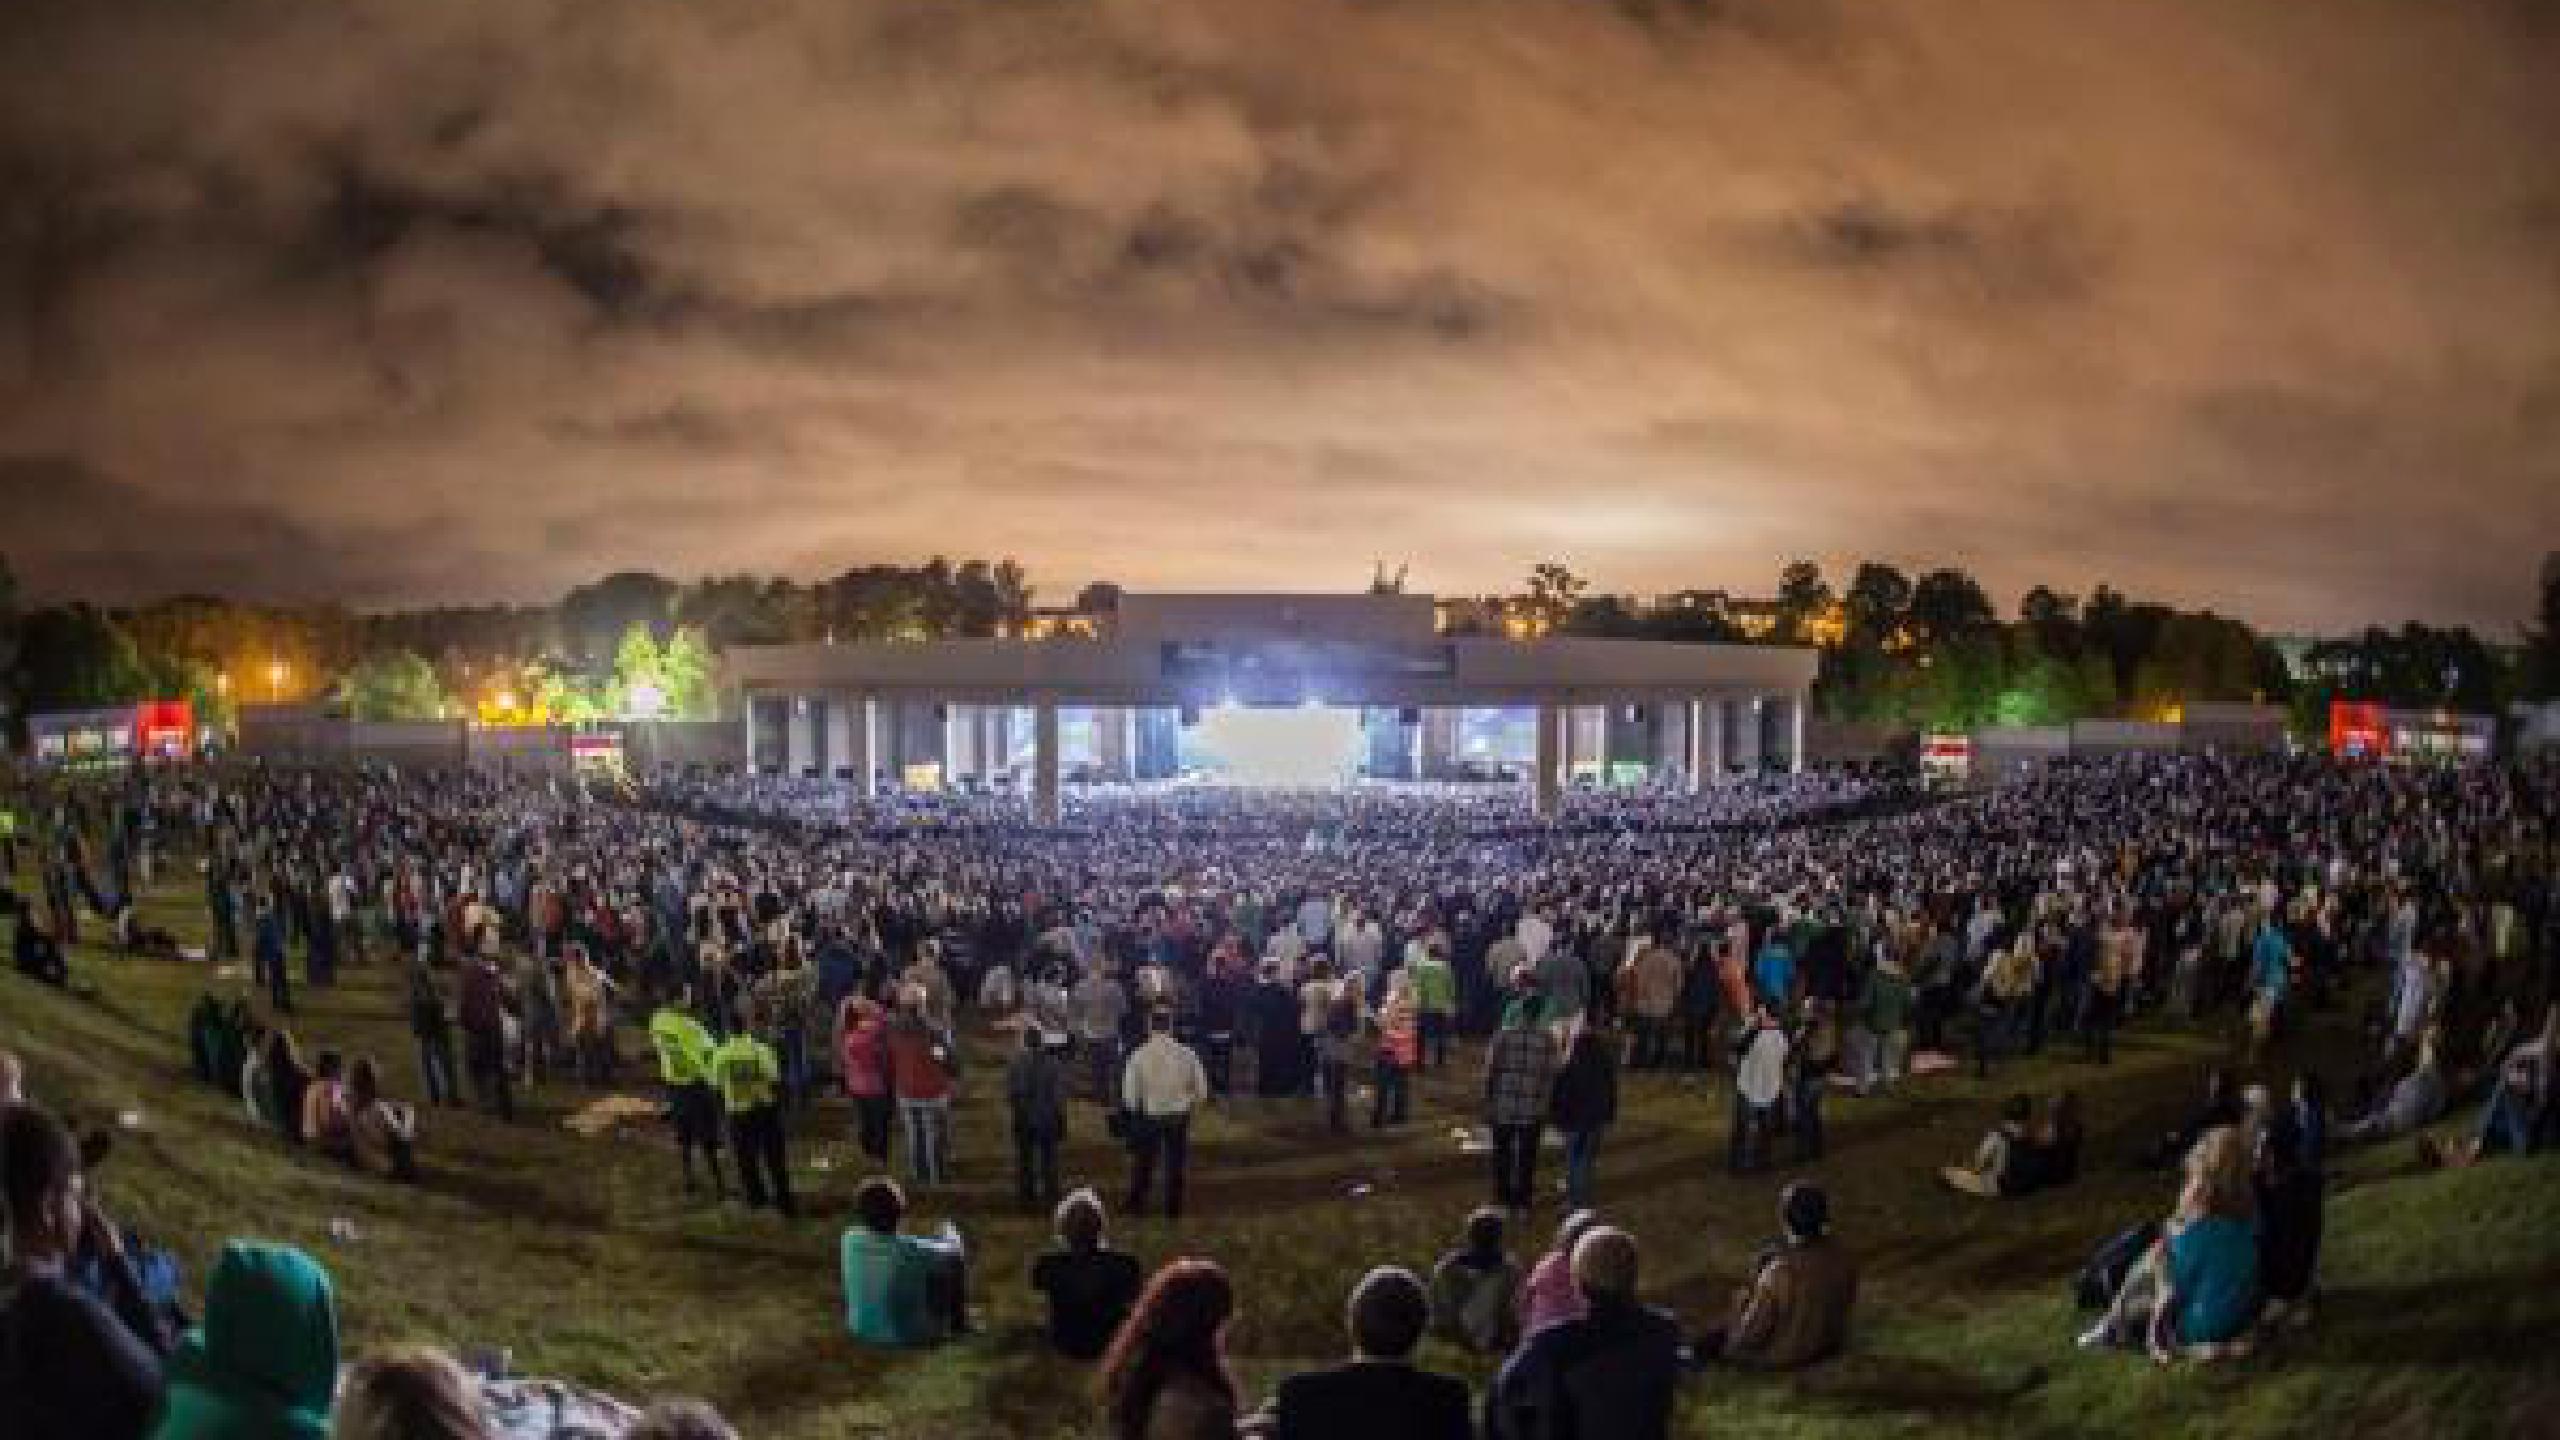 Lakewood Amphitheater Schedule 2022 Lakewood Amphitheatre Tickets And Concerts 2022 2023 | Wegow United States